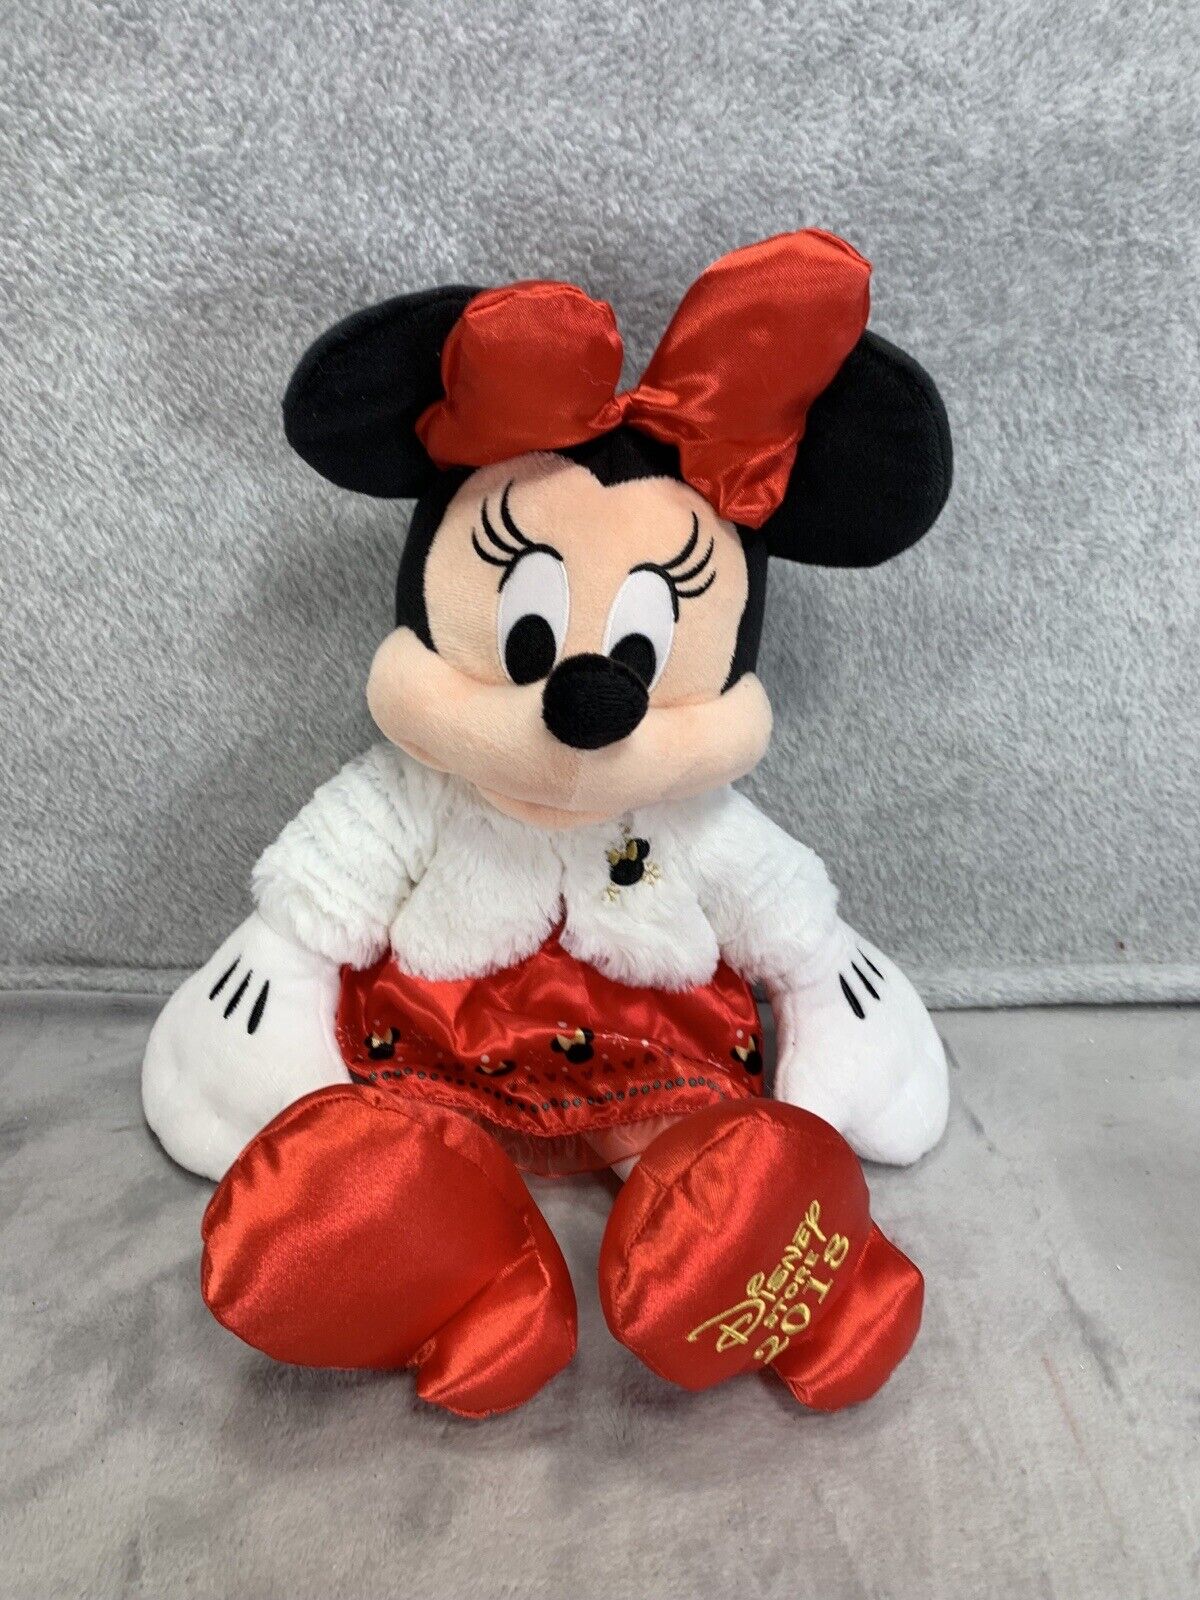 Disney Store 2018 Holiday Minnie Mouse Plush Red Dress White Sweater